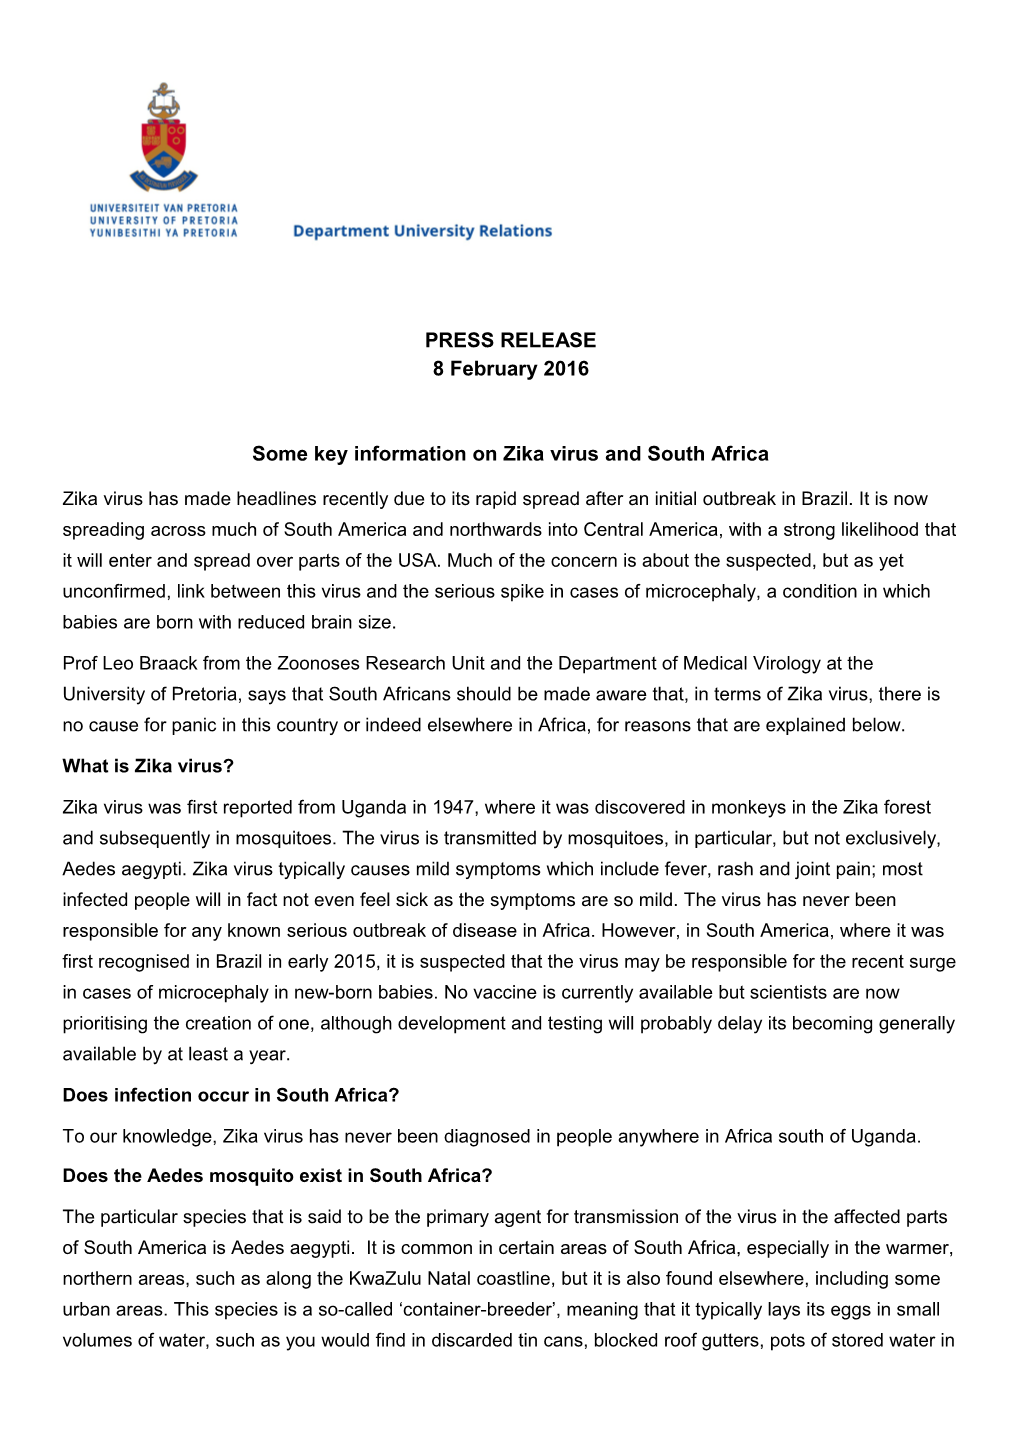 Some Key Information on Zika Virus and South Africa